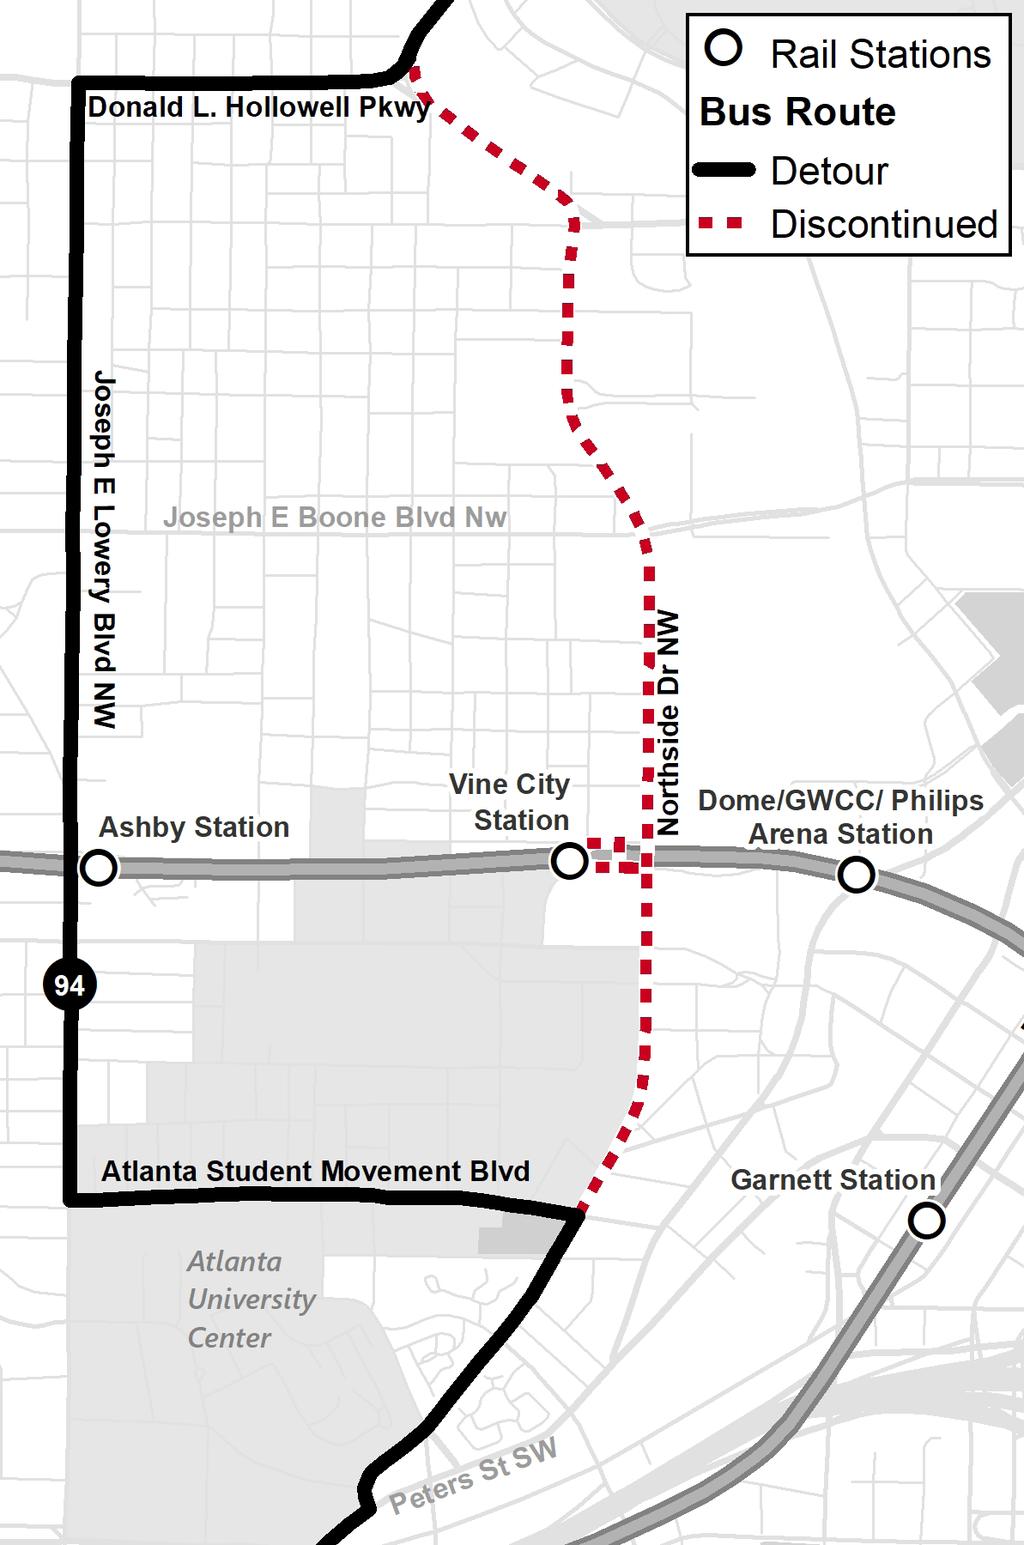 Route 94 - Northside Dr DETOUR INFORMATION - February 2 & 3, 2019 Route 94 will be detoured away from Northside Dr between Atlanta Student Movement Blvd and Donald L. Hollowell Pkwy.